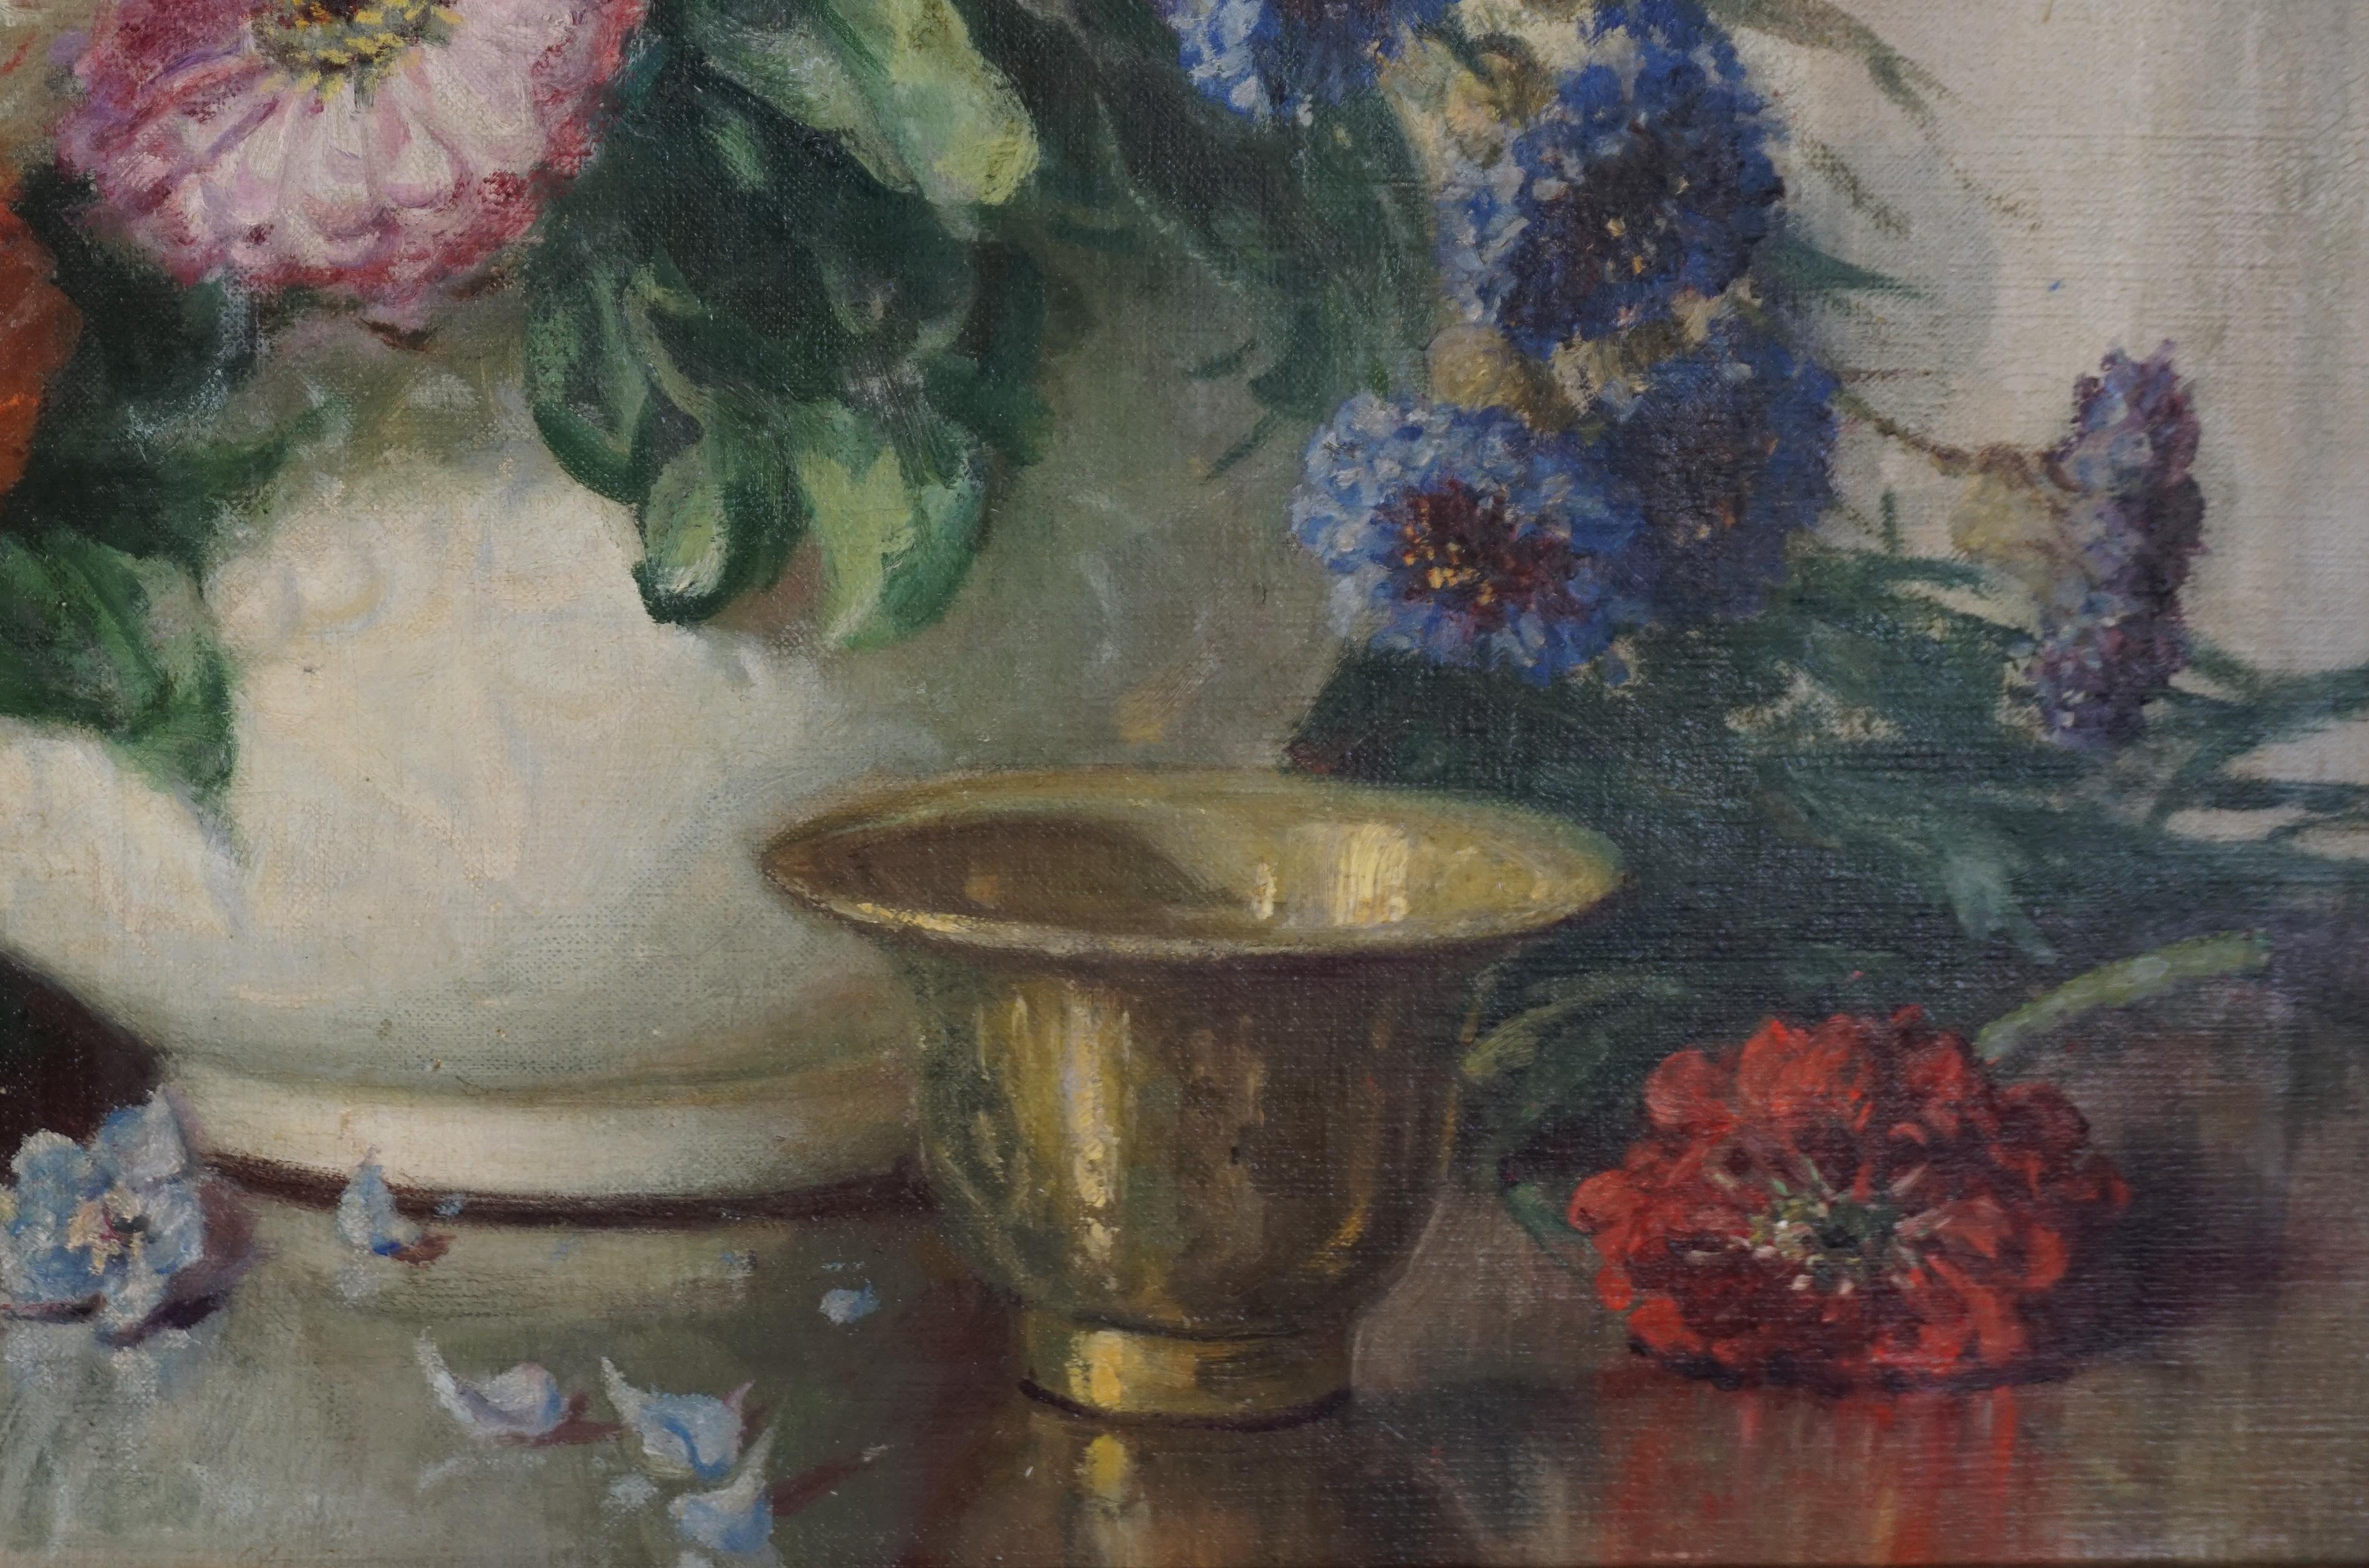 Early 20th Century Summer Floral Still Life - Zinnias, Delphiniums, Corn Flowers - Brown Still-Life Painting by Volney Richardson